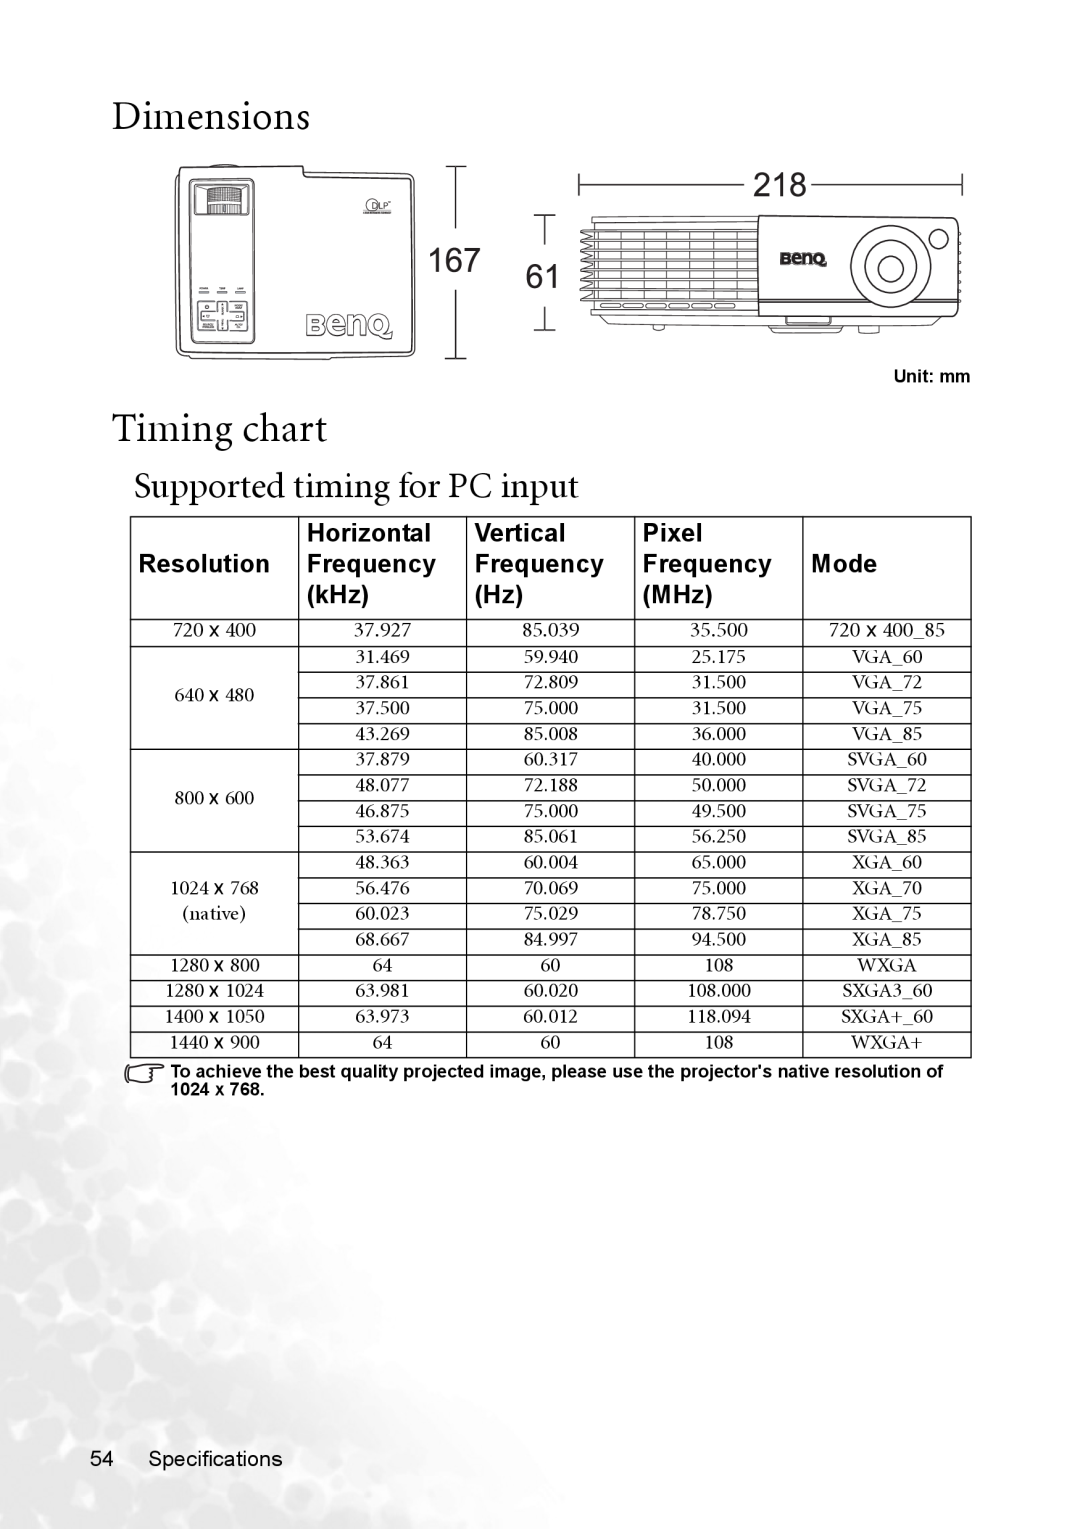 BenQ CP120 manual Dimensions, Timing chart, Supported timing for PC input 